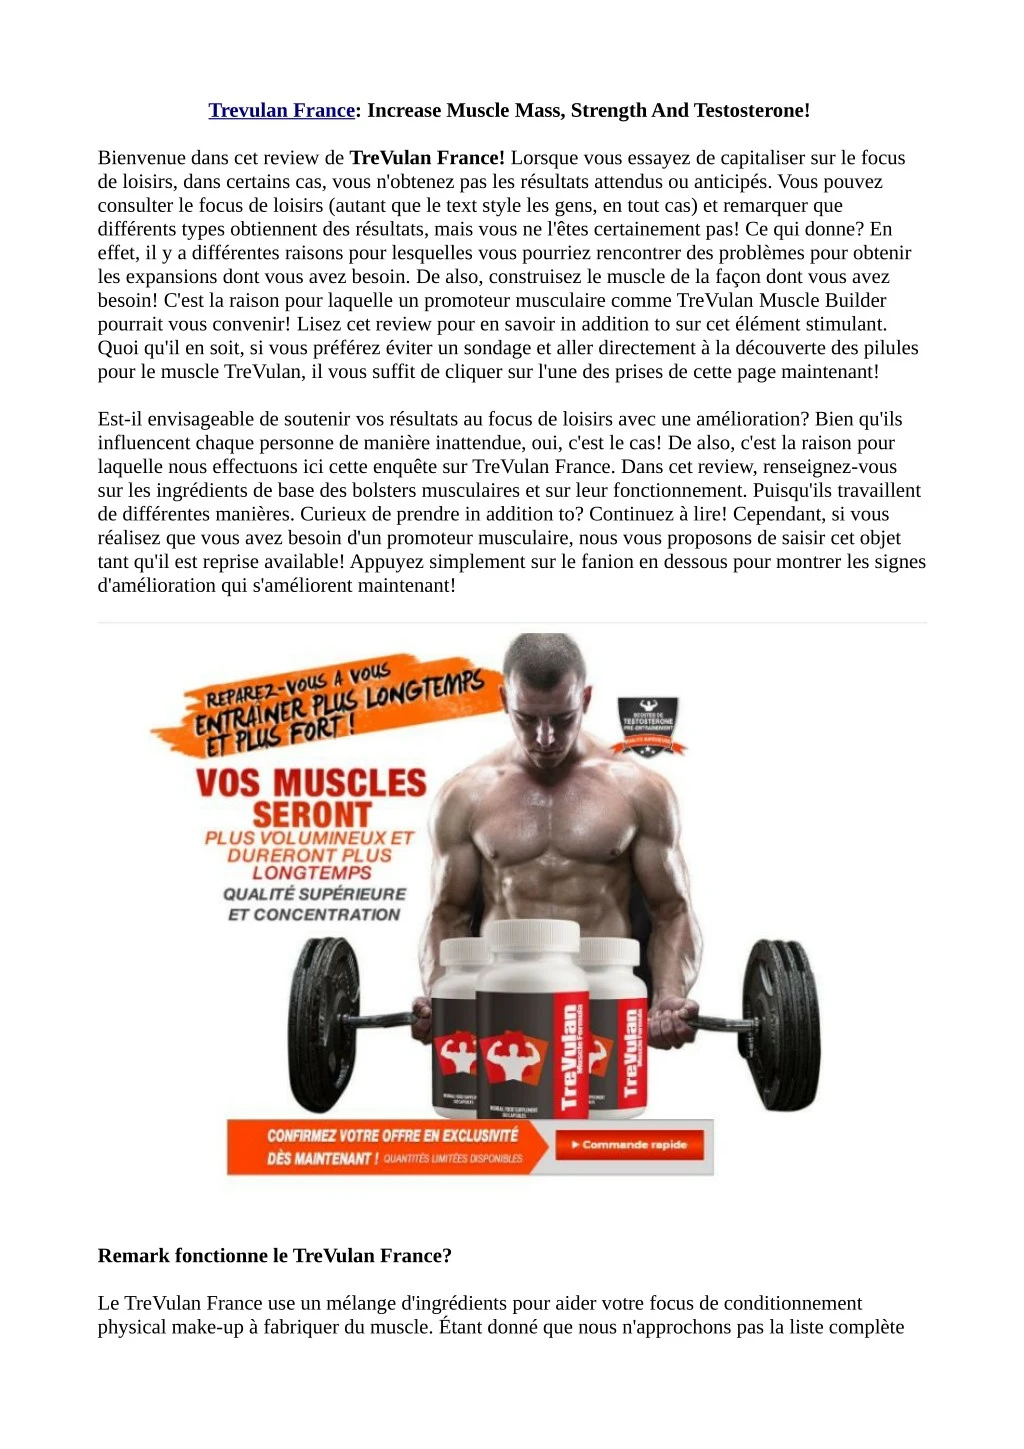 trevulan france increase muscle mass strength